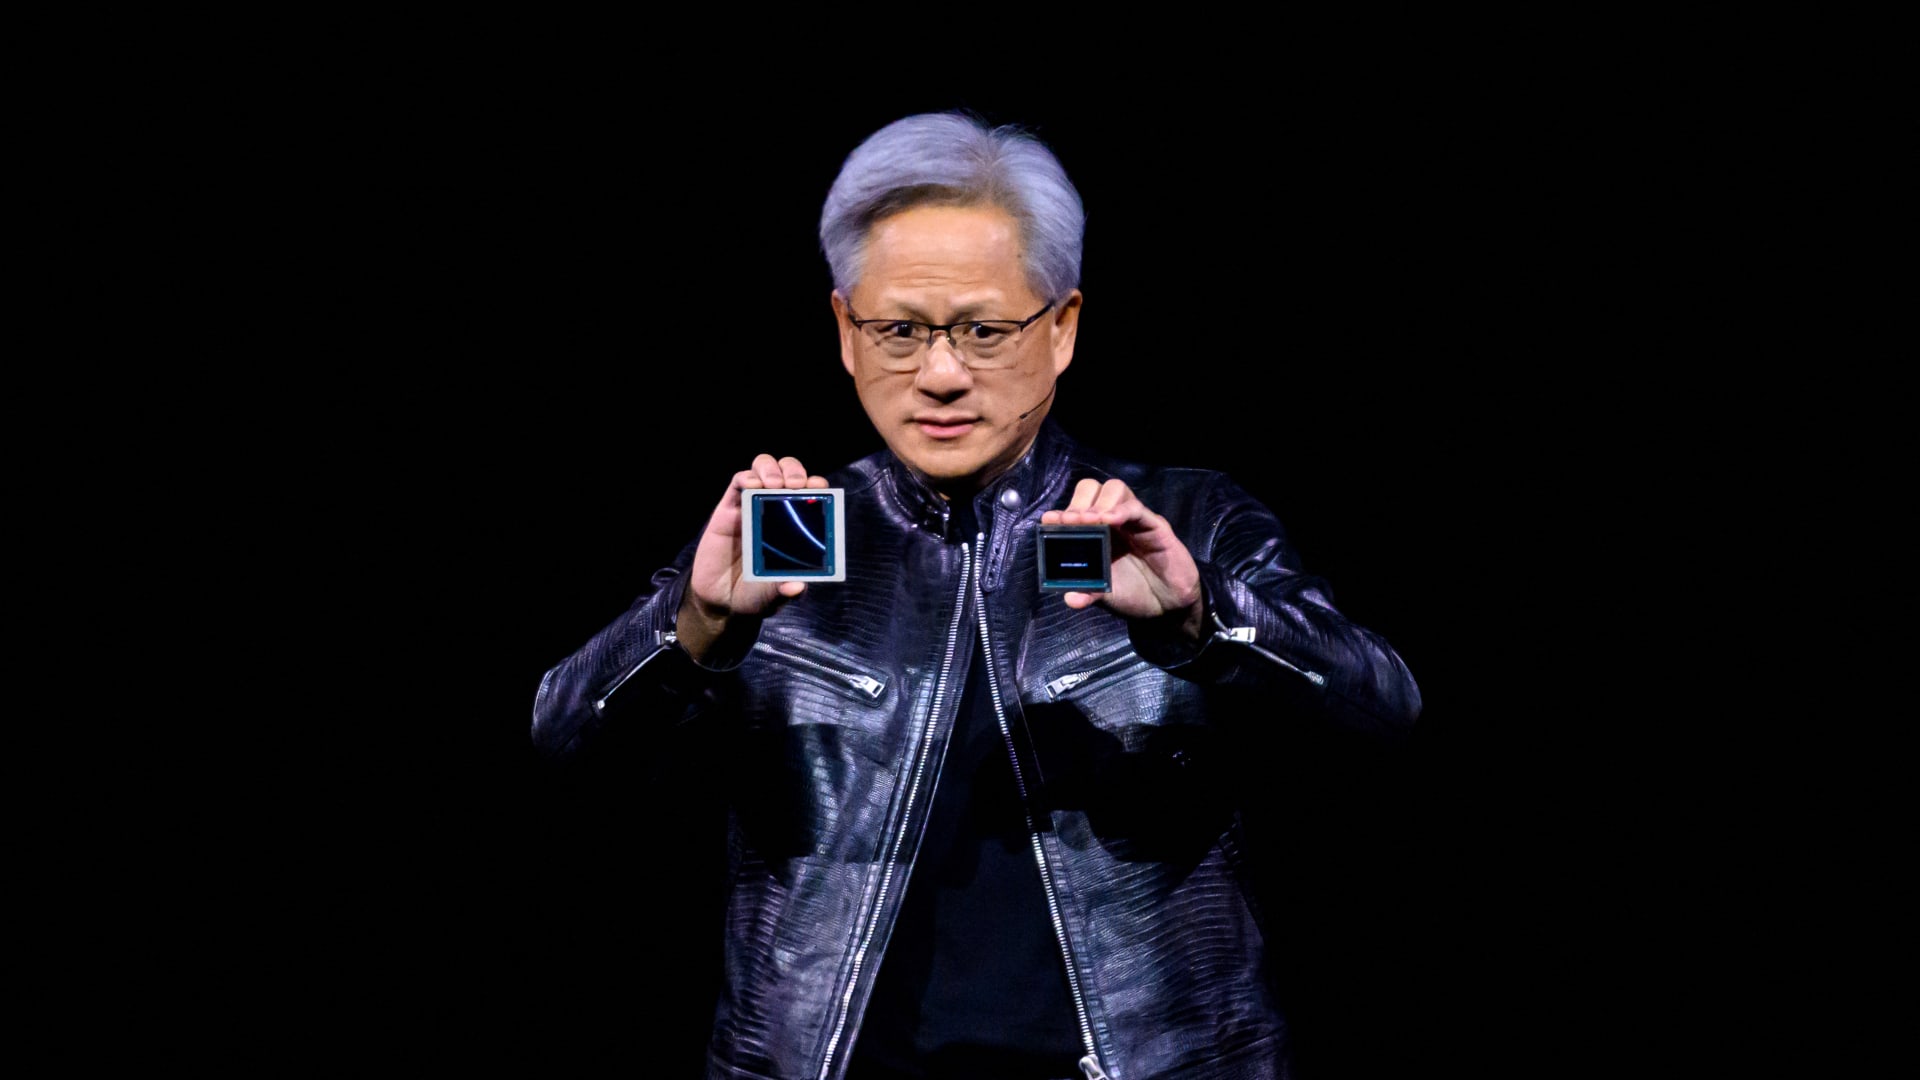 Nvidia launched powerful AI chips. Goldman expects boost to 3 stocks